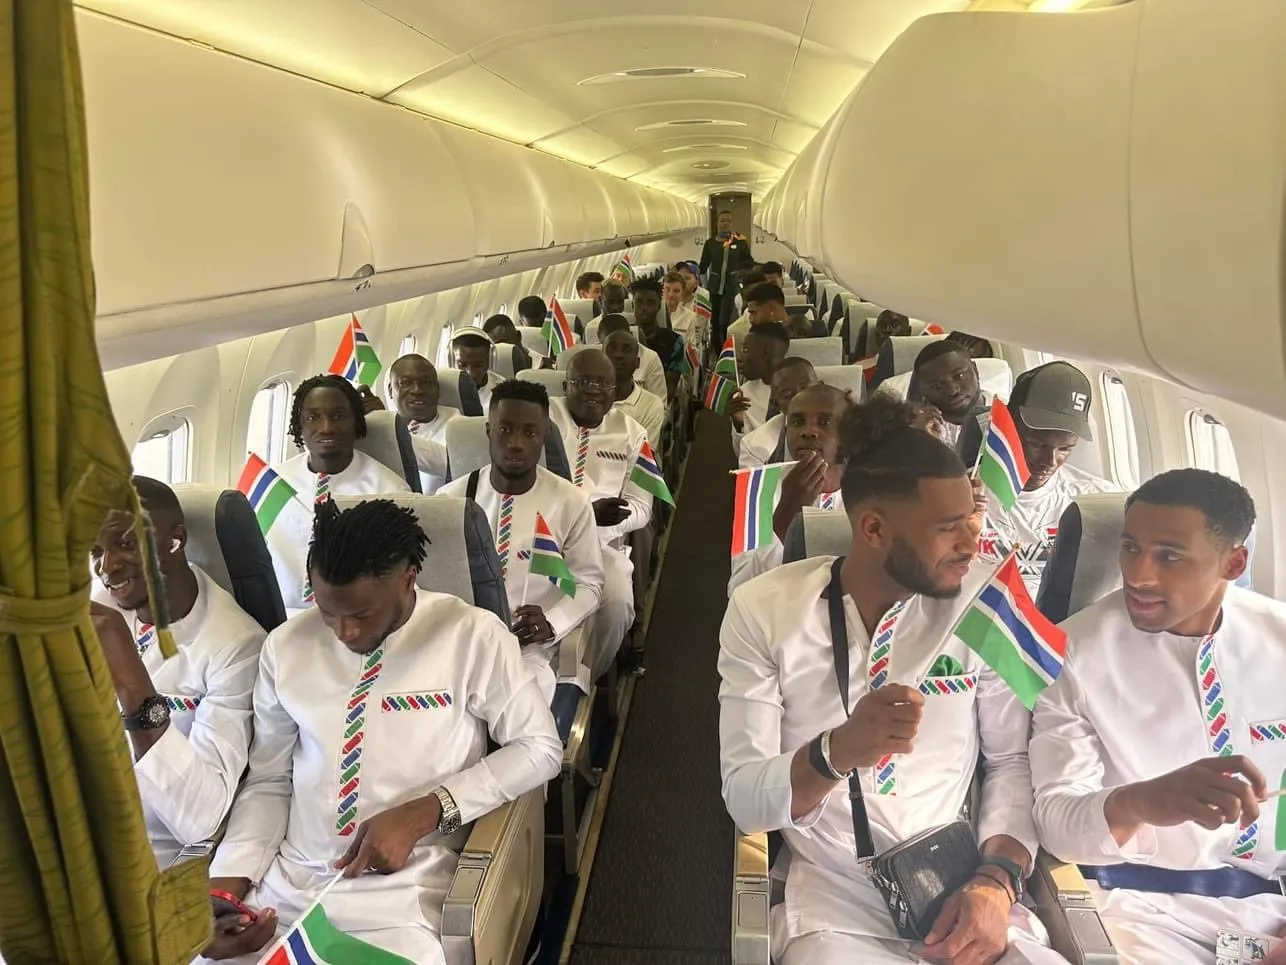 Gambia team’s flight to Afcon forced to make emergency landing after several players passed out midair